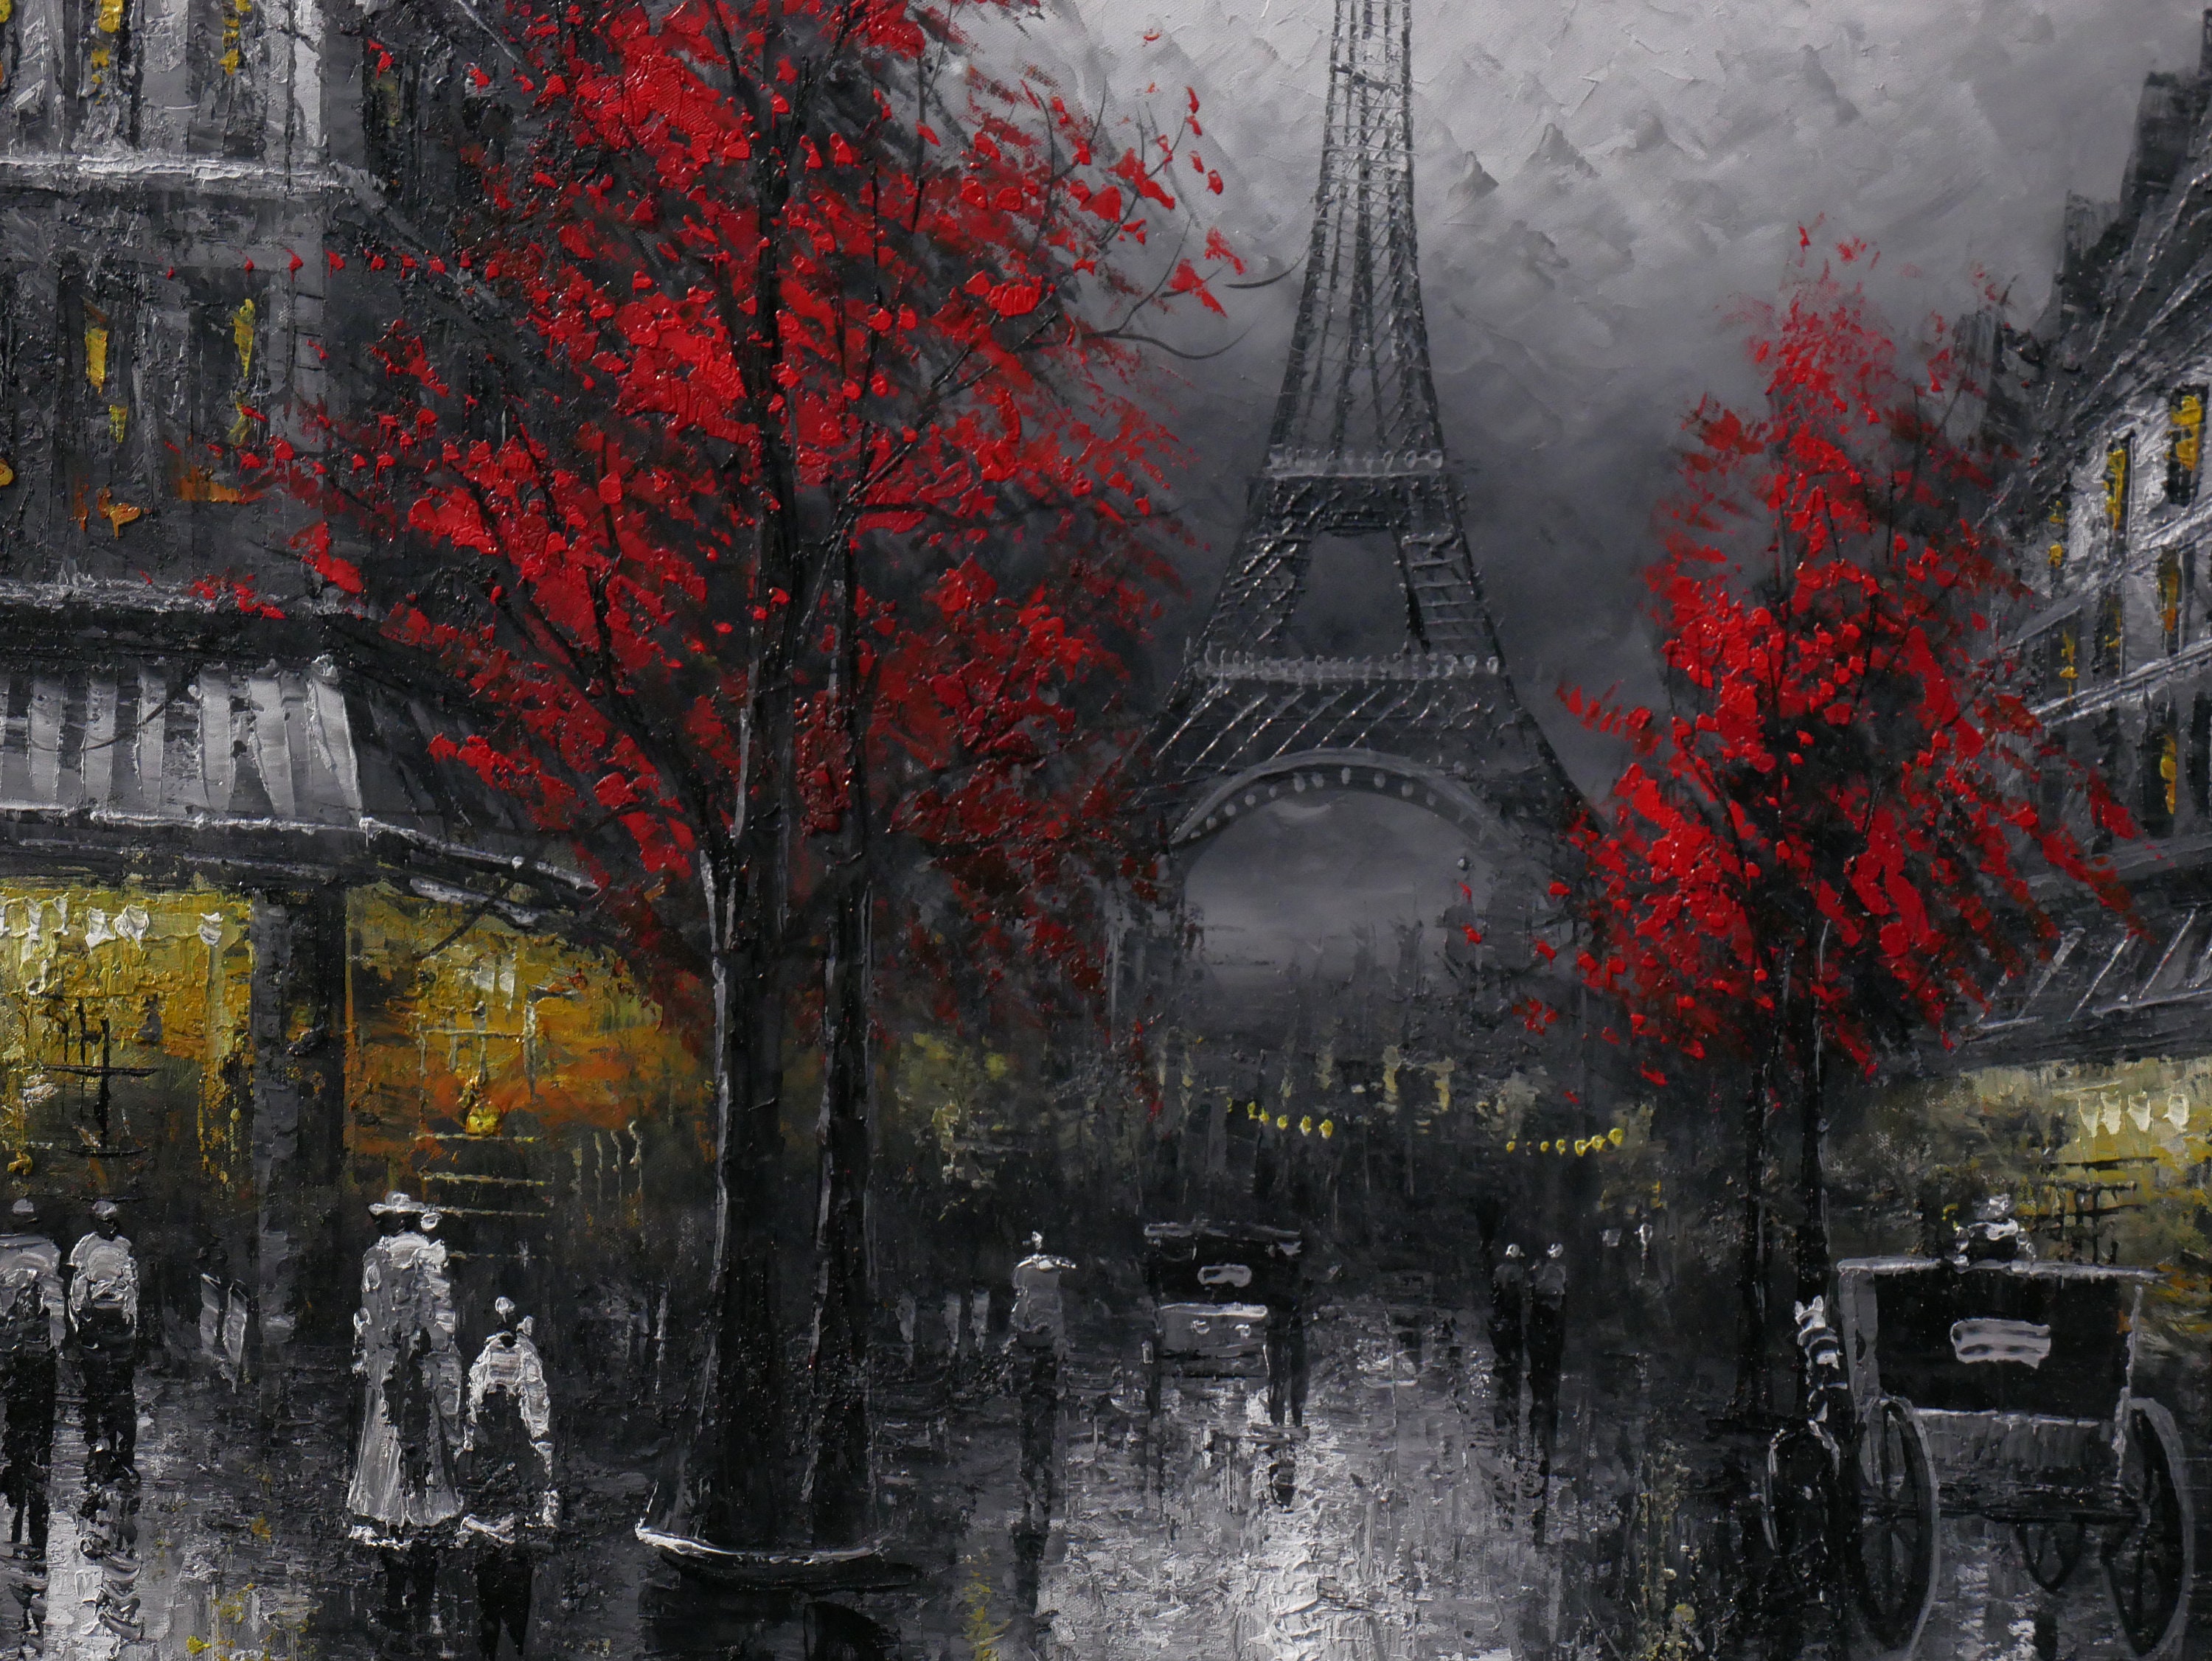 Black and White Paris Art Eiffel Tower Painting Oil on Canvas Wall Art